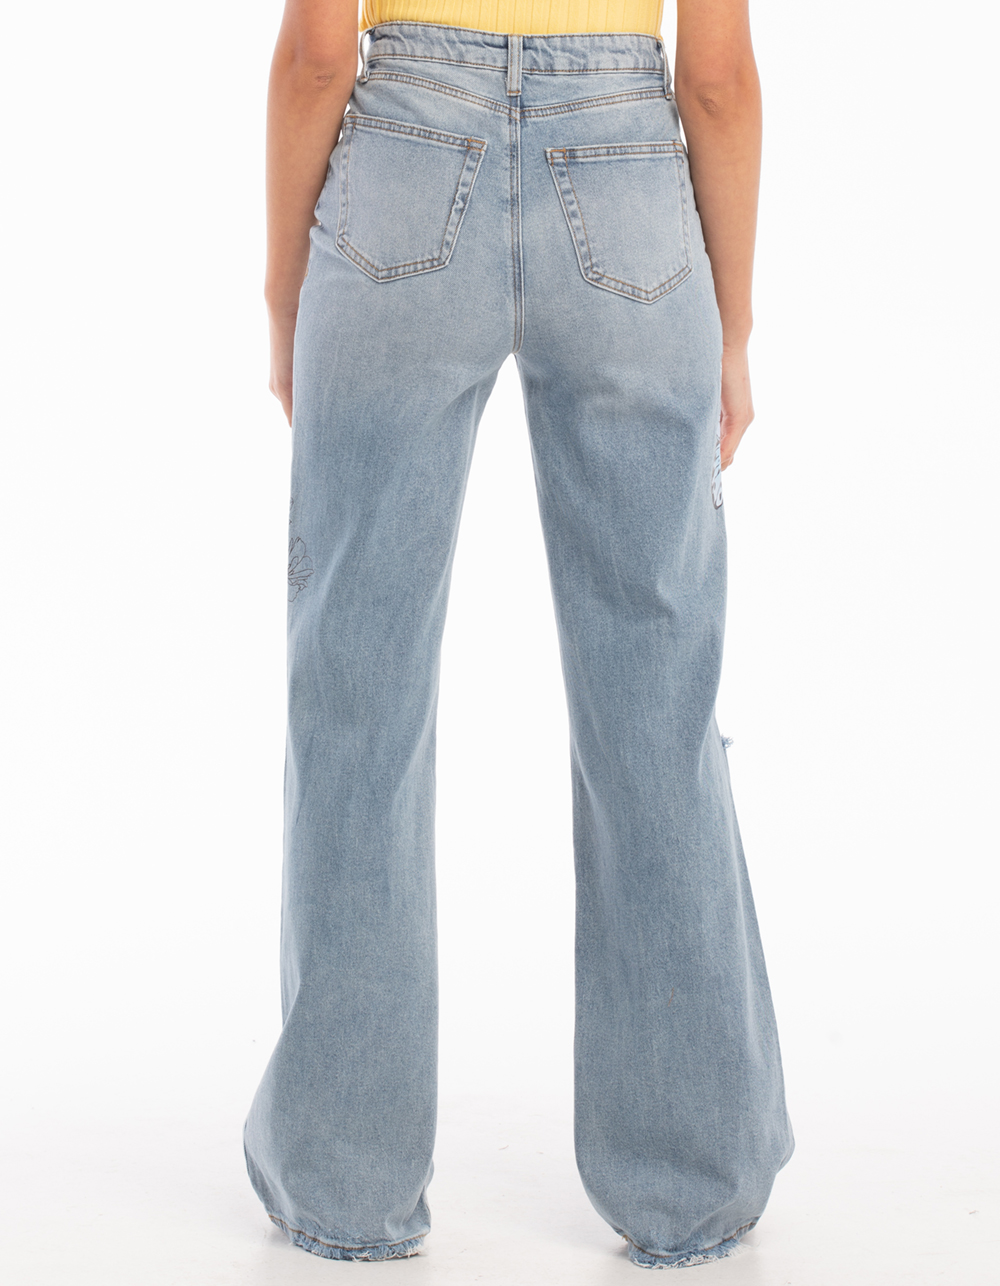 TINSELTOWN High Rise Graphic Wide Leg Jeans - MEDIUM WASH | Tillys